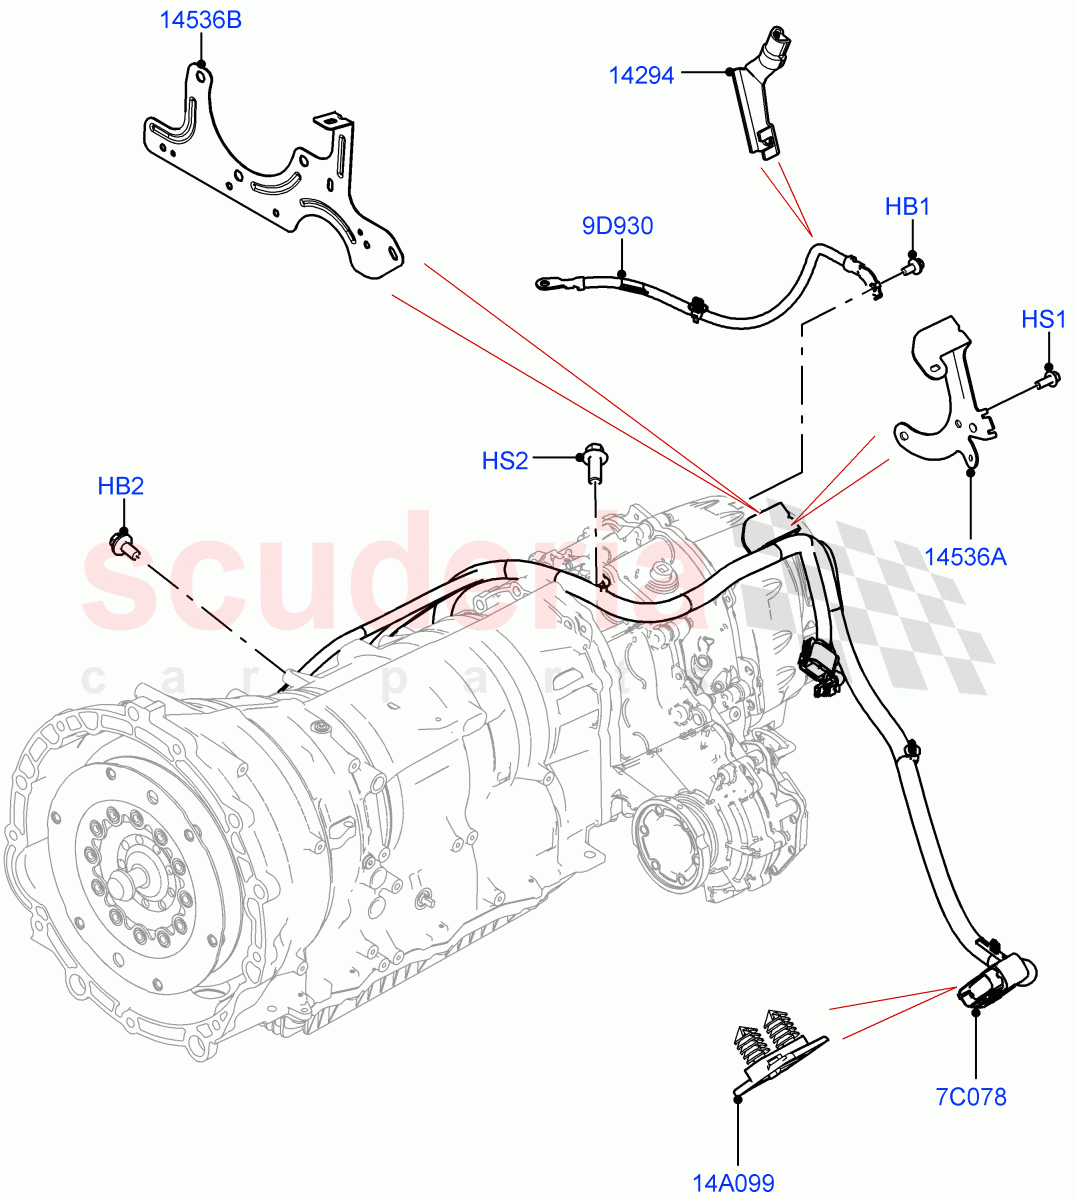 Electrical Wiring - Engine And Dash(Transmission) of Land Rover Land Rover Defender (2020+) [2.0 Turbo Diesel]